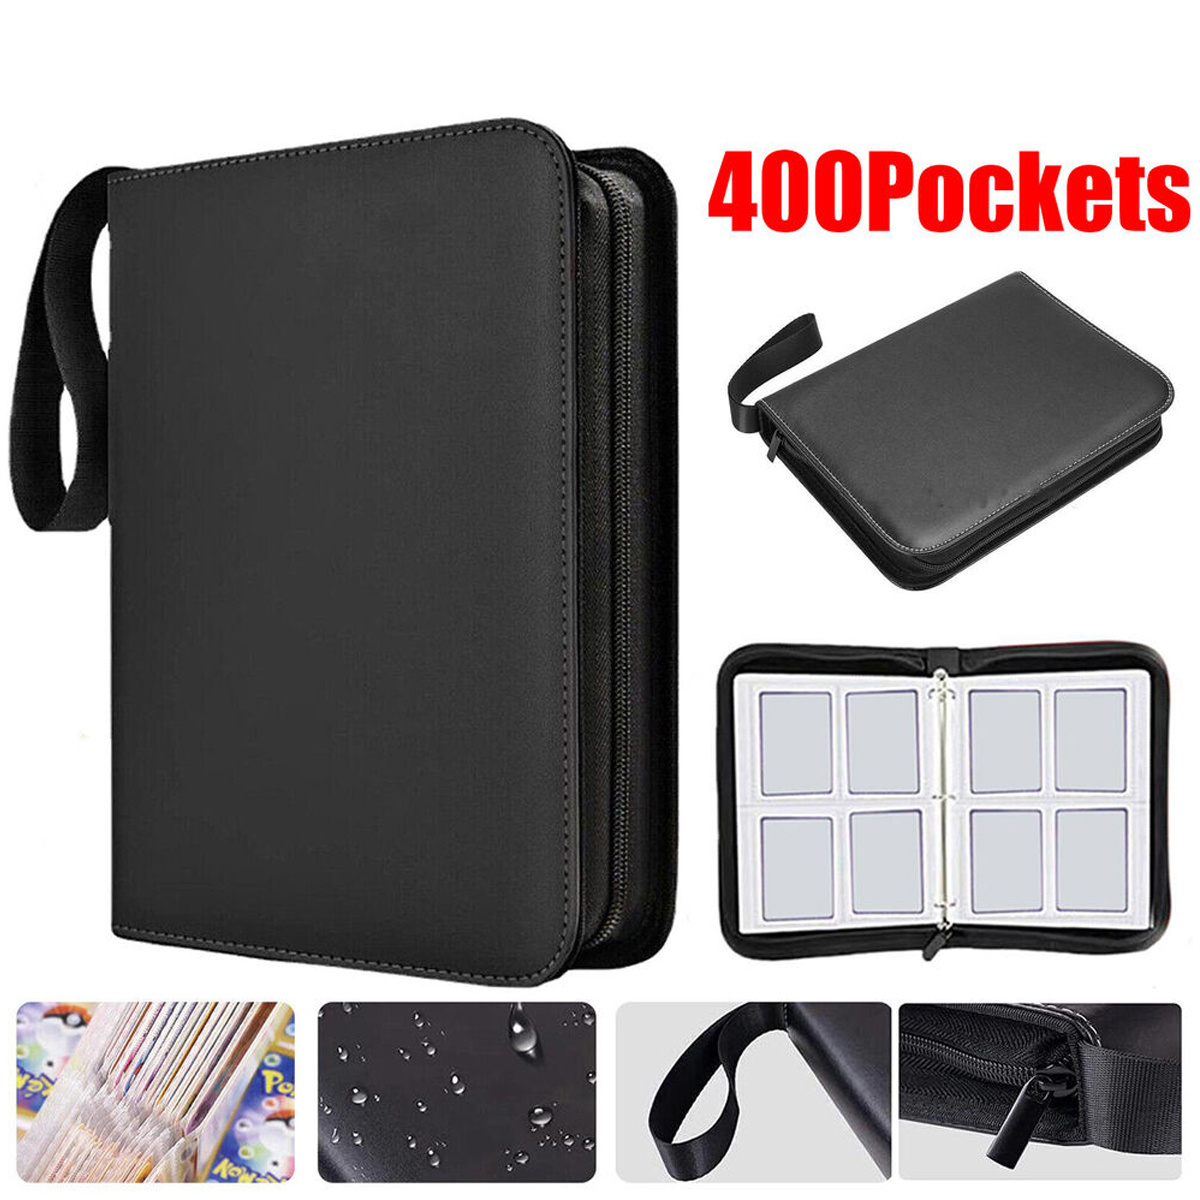 Card Binder 4-Pockets, 400 Pockets Card Holder with 50 Removable Sleeves,  Trading Card Collector Zipper Album Holder